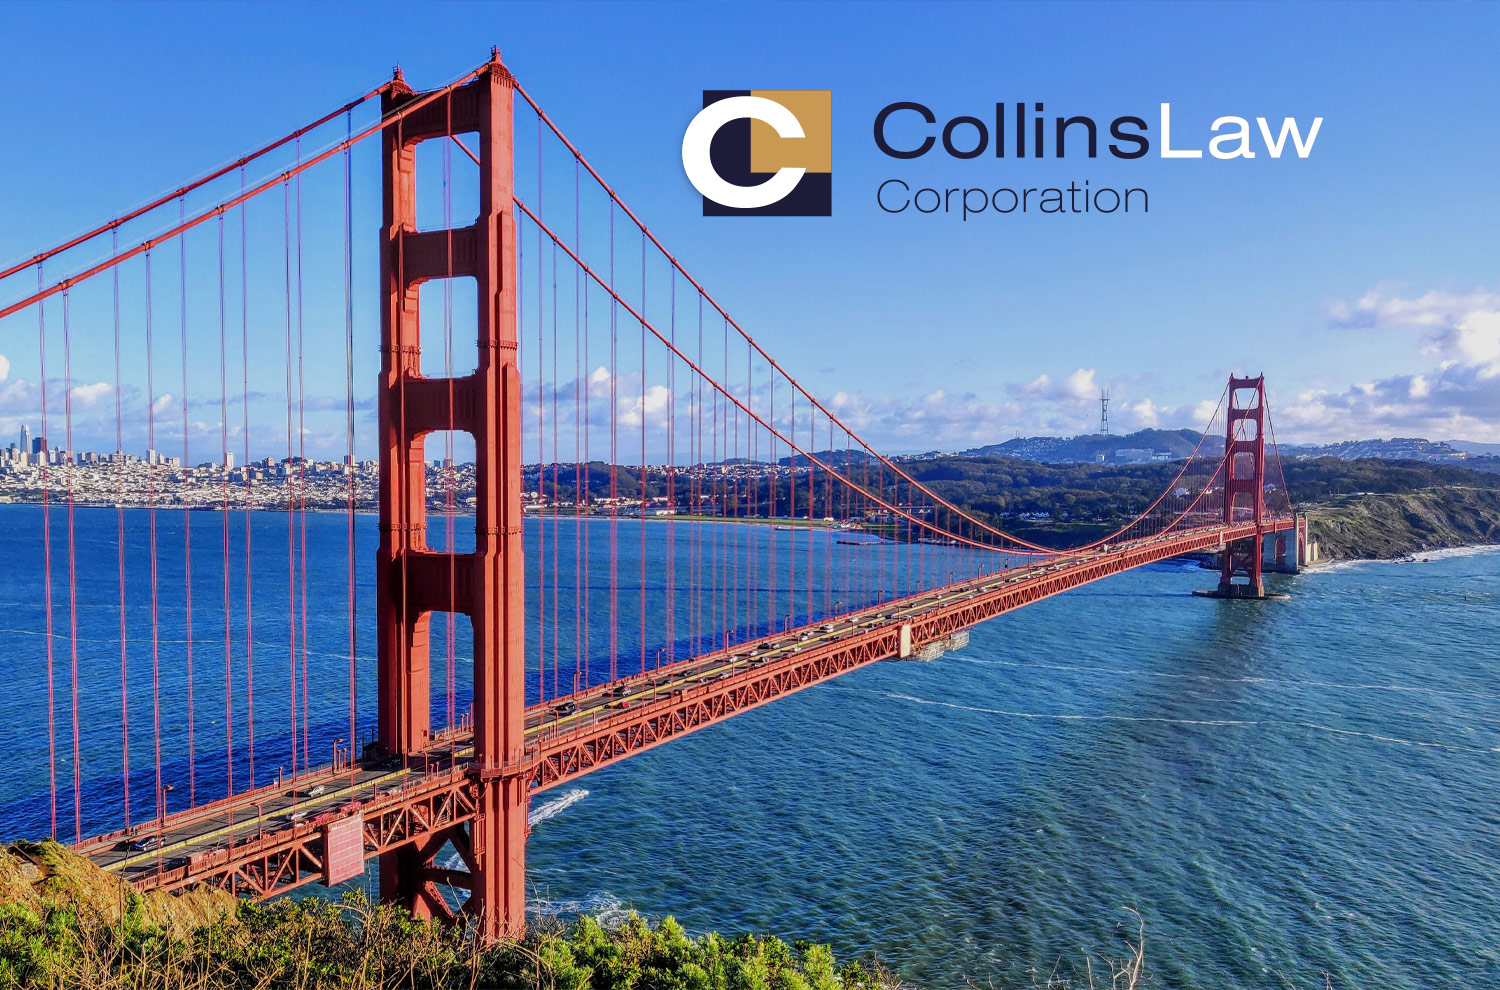 Image of Image collage featuring the Collins Law logo and the Golden Gate Bridge